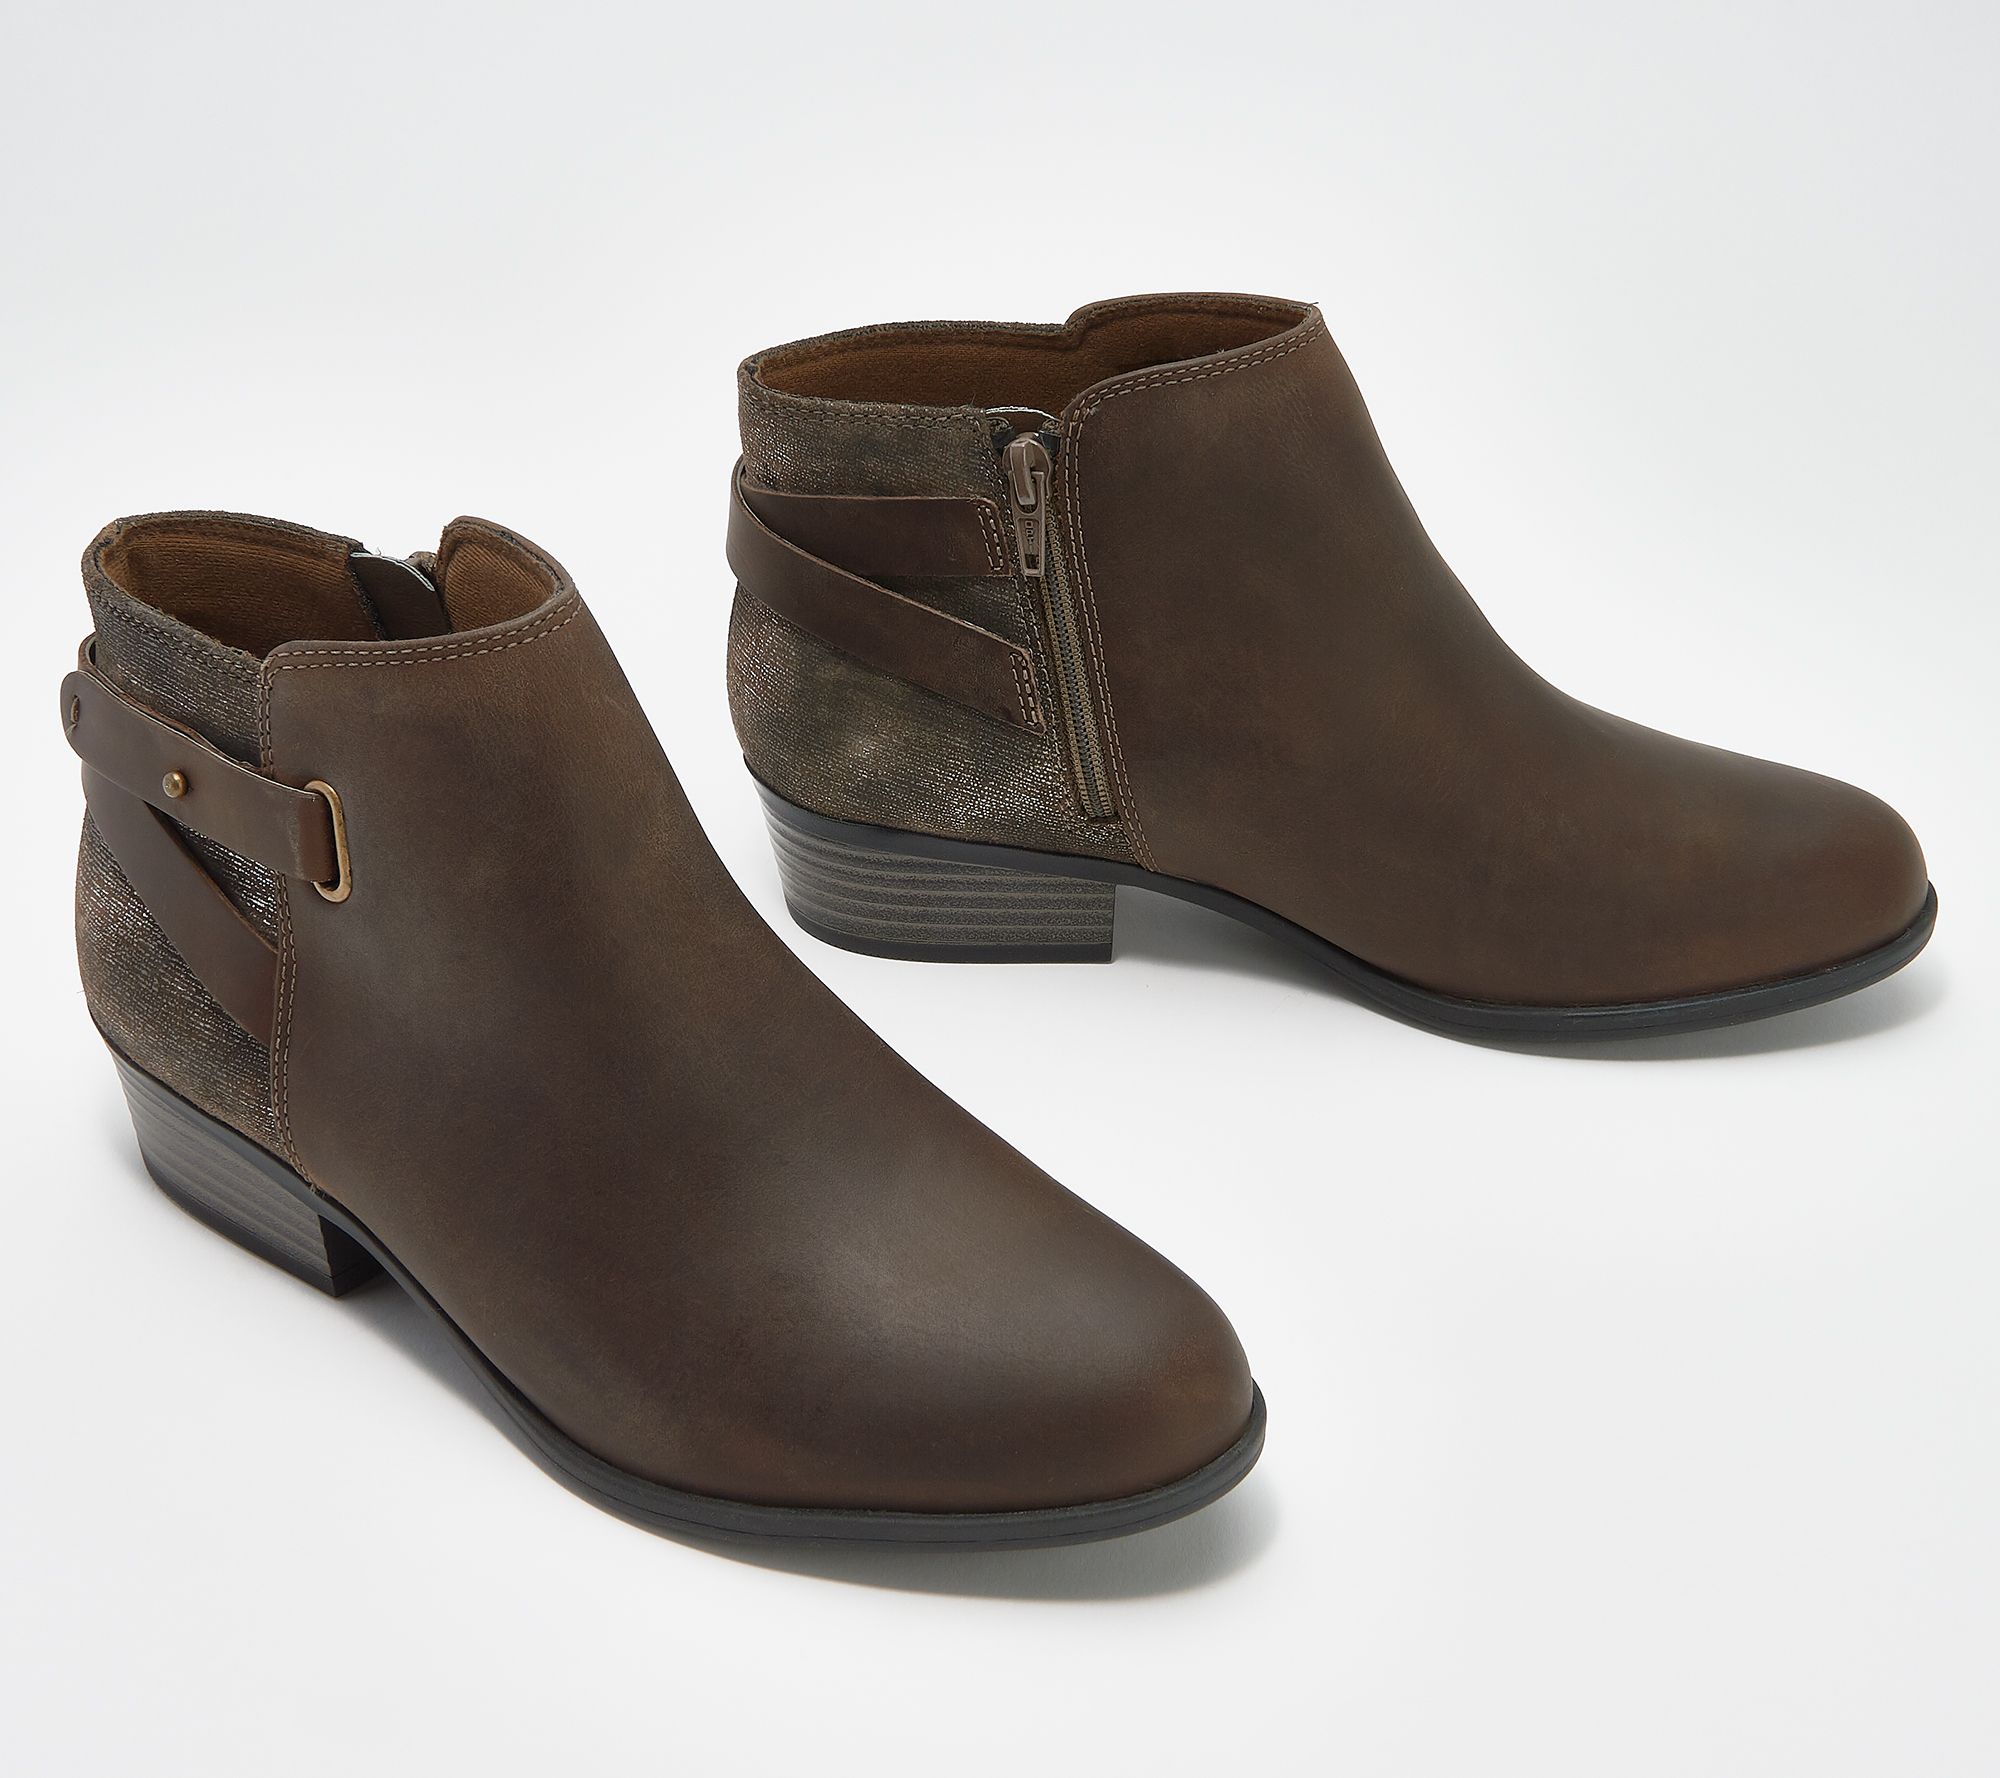 qvc clarks boots recently on air